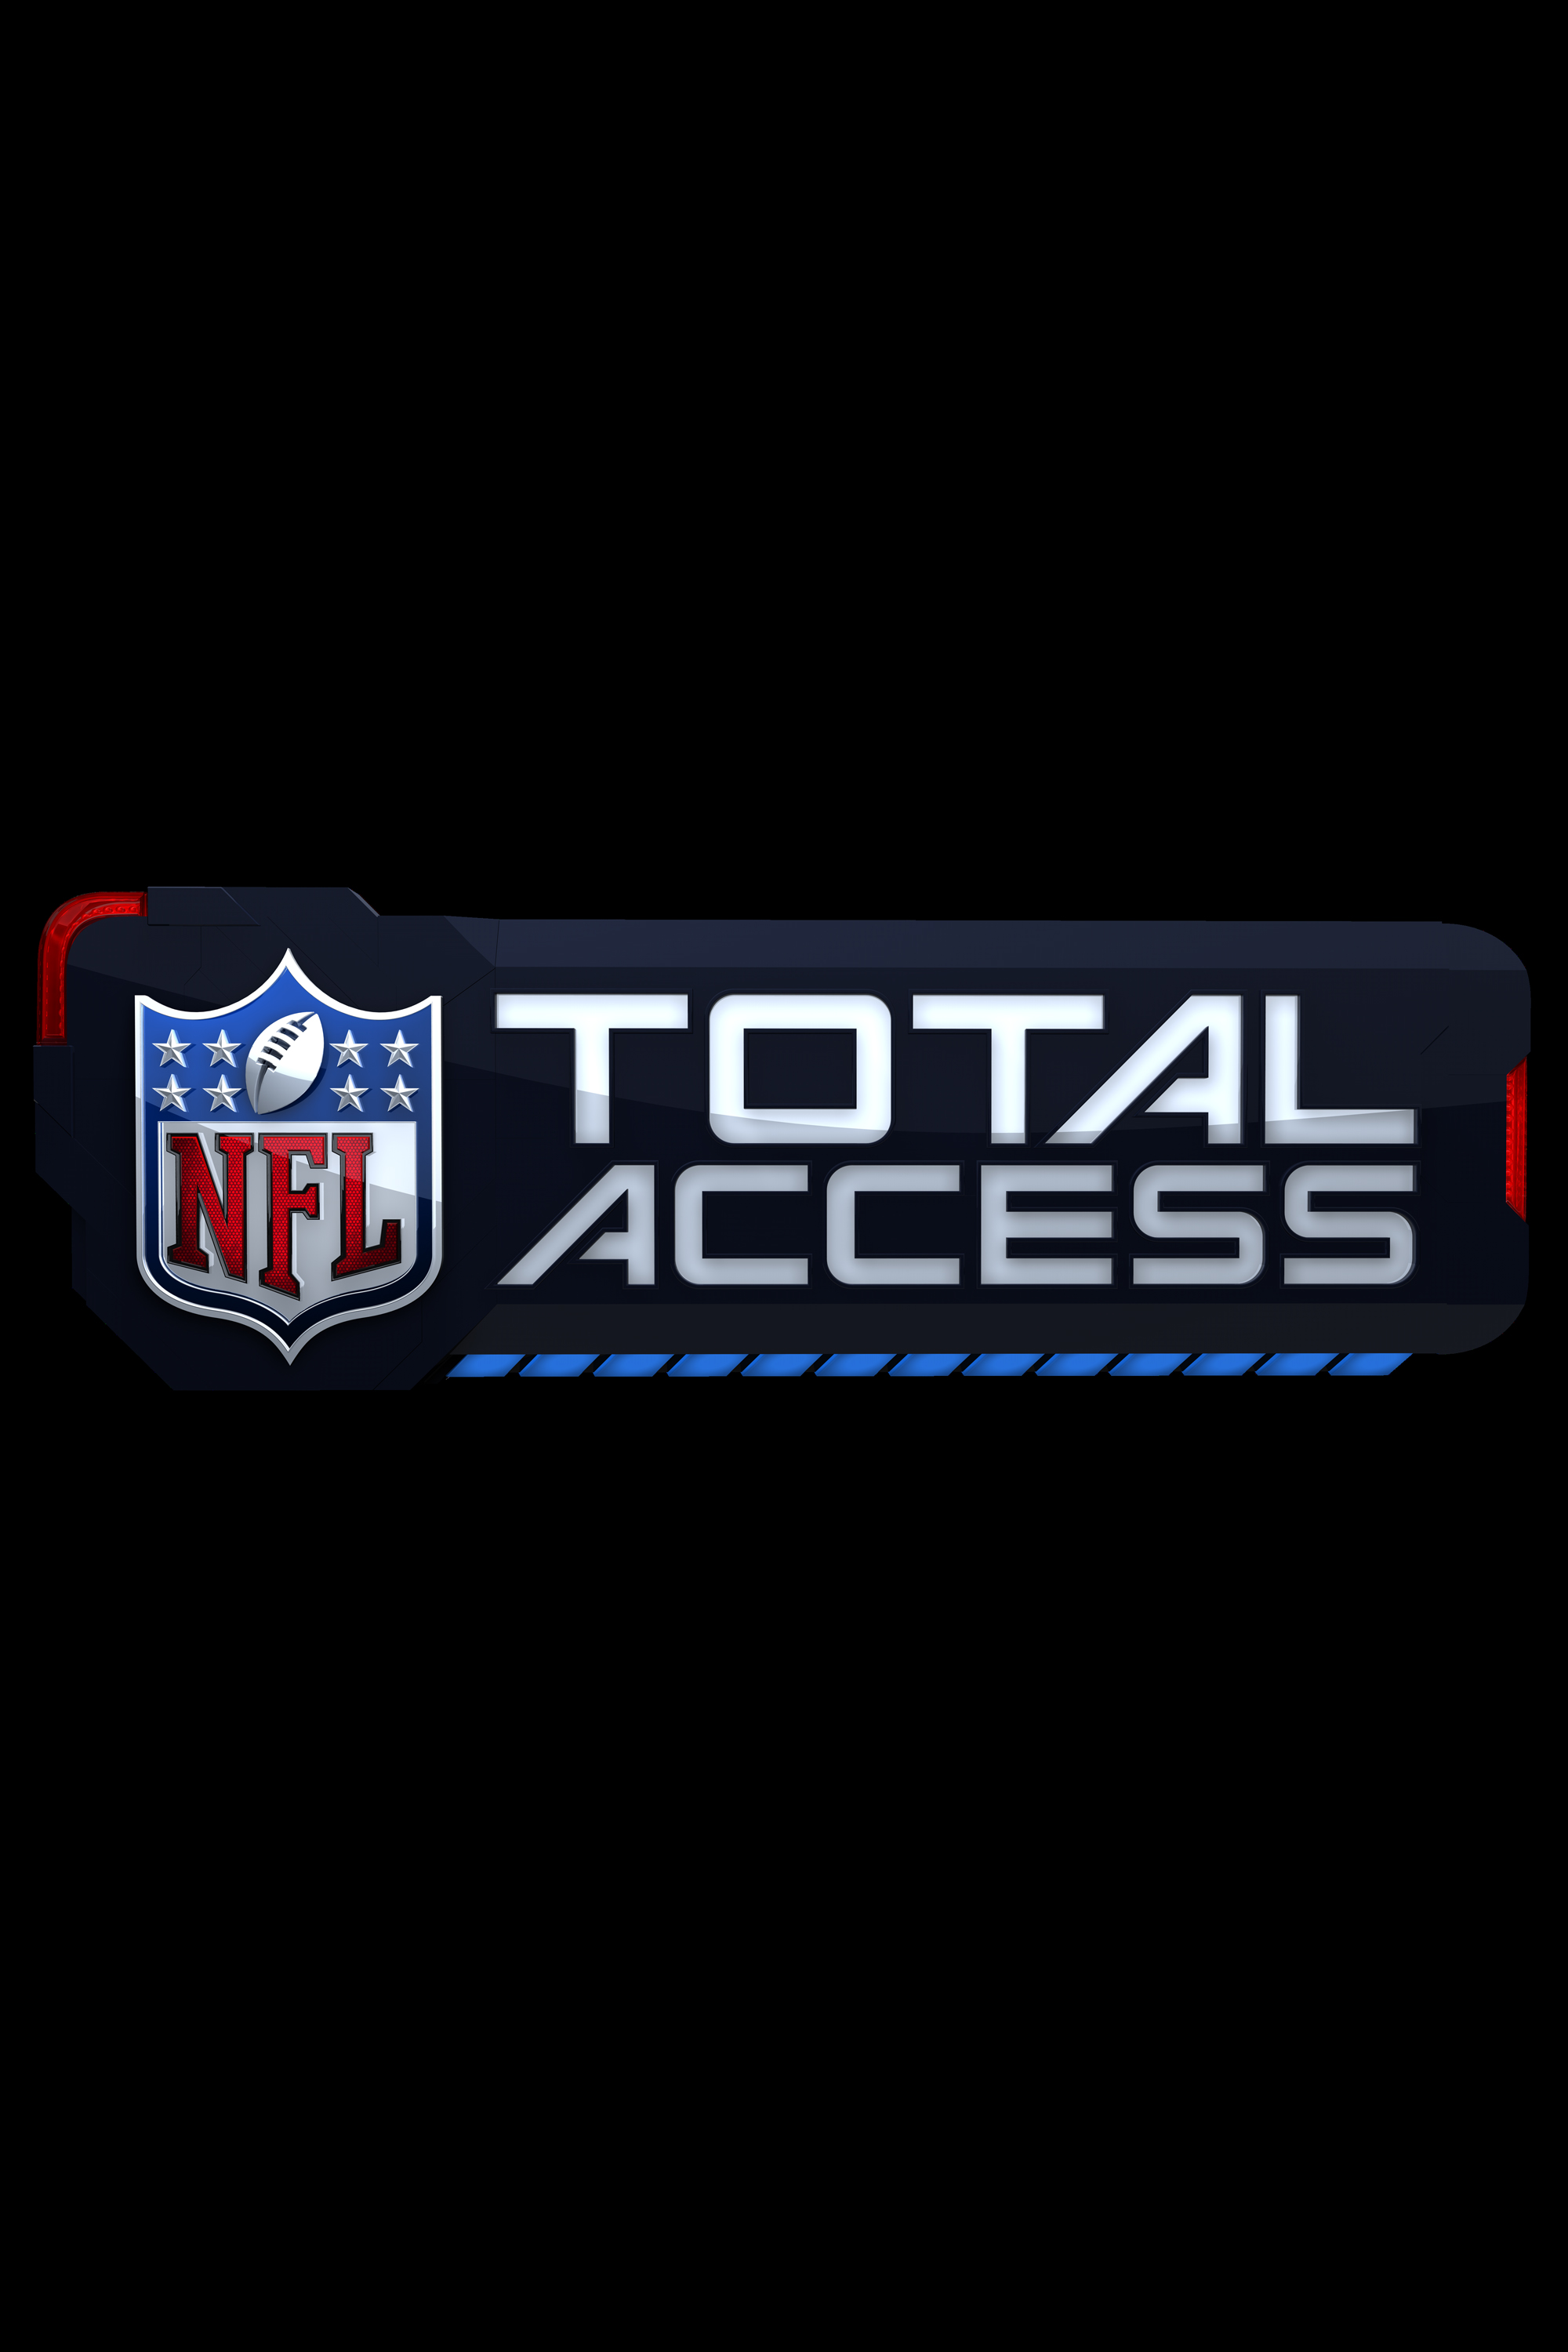 NFL Total Access - Where to Watch and Stream